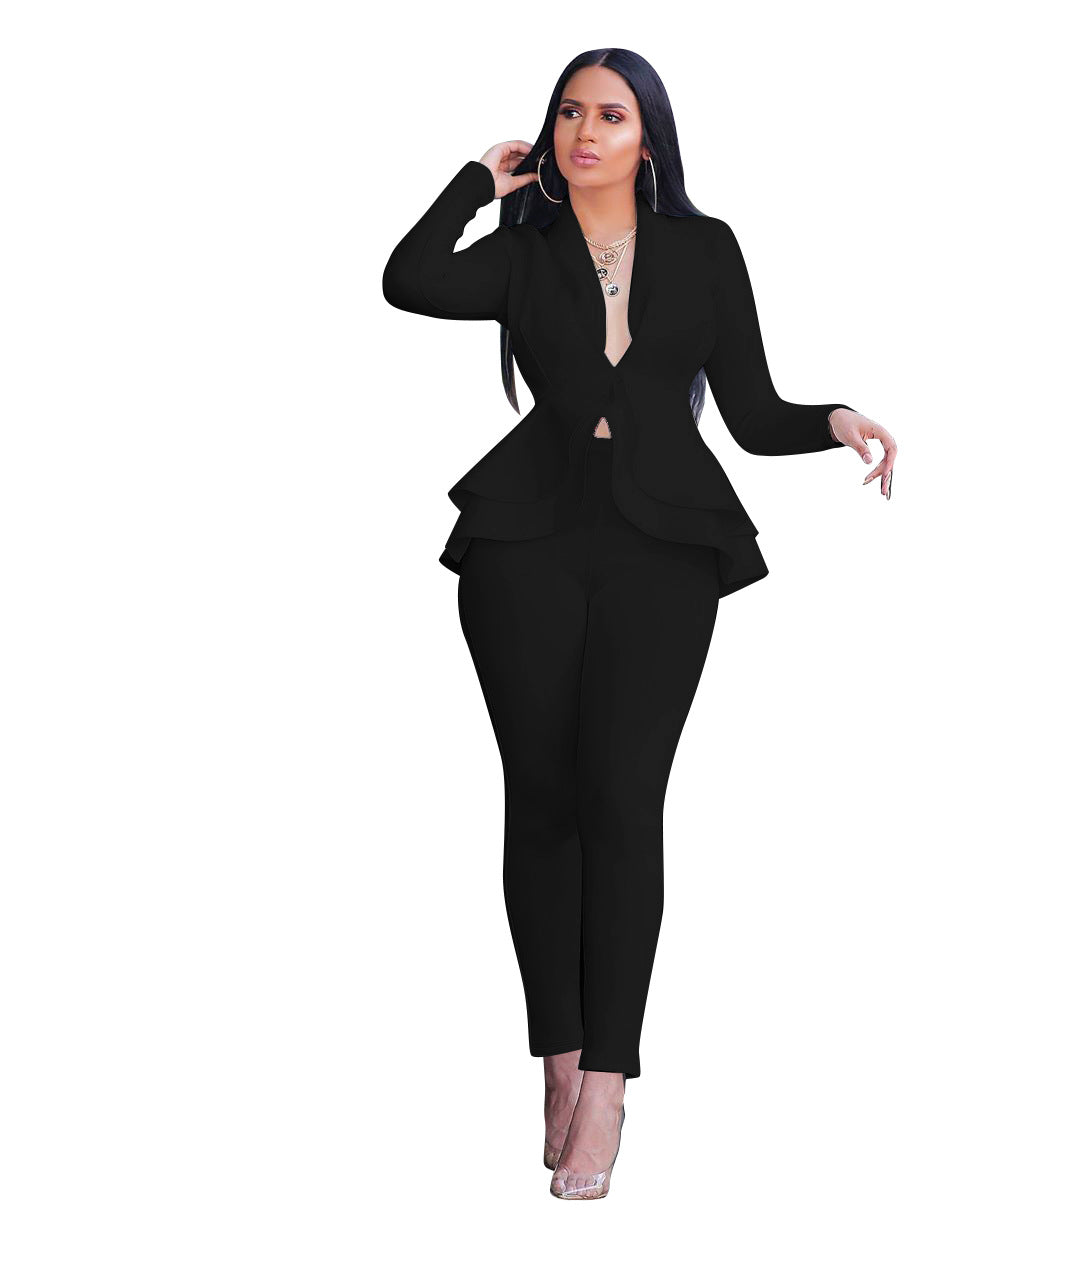 Women's Ruffles Air Layer Business Wear For Suits